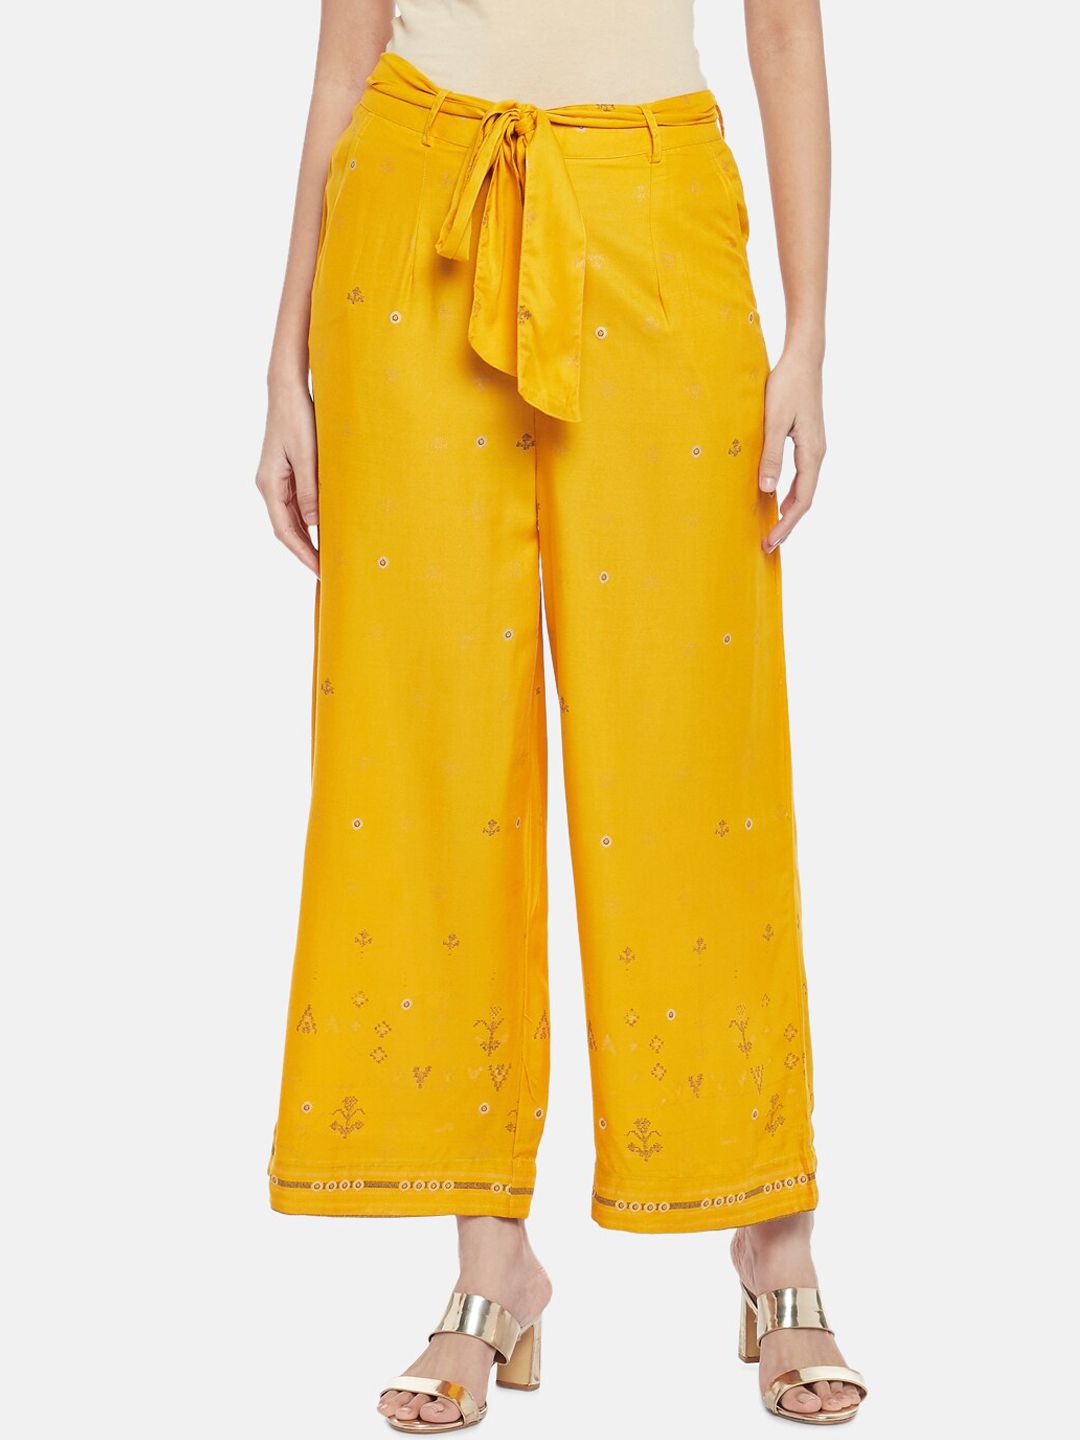 AKKRITI BY PANTALOONS Women Mustard Yellow Pleated Parallel Trousers Price in India